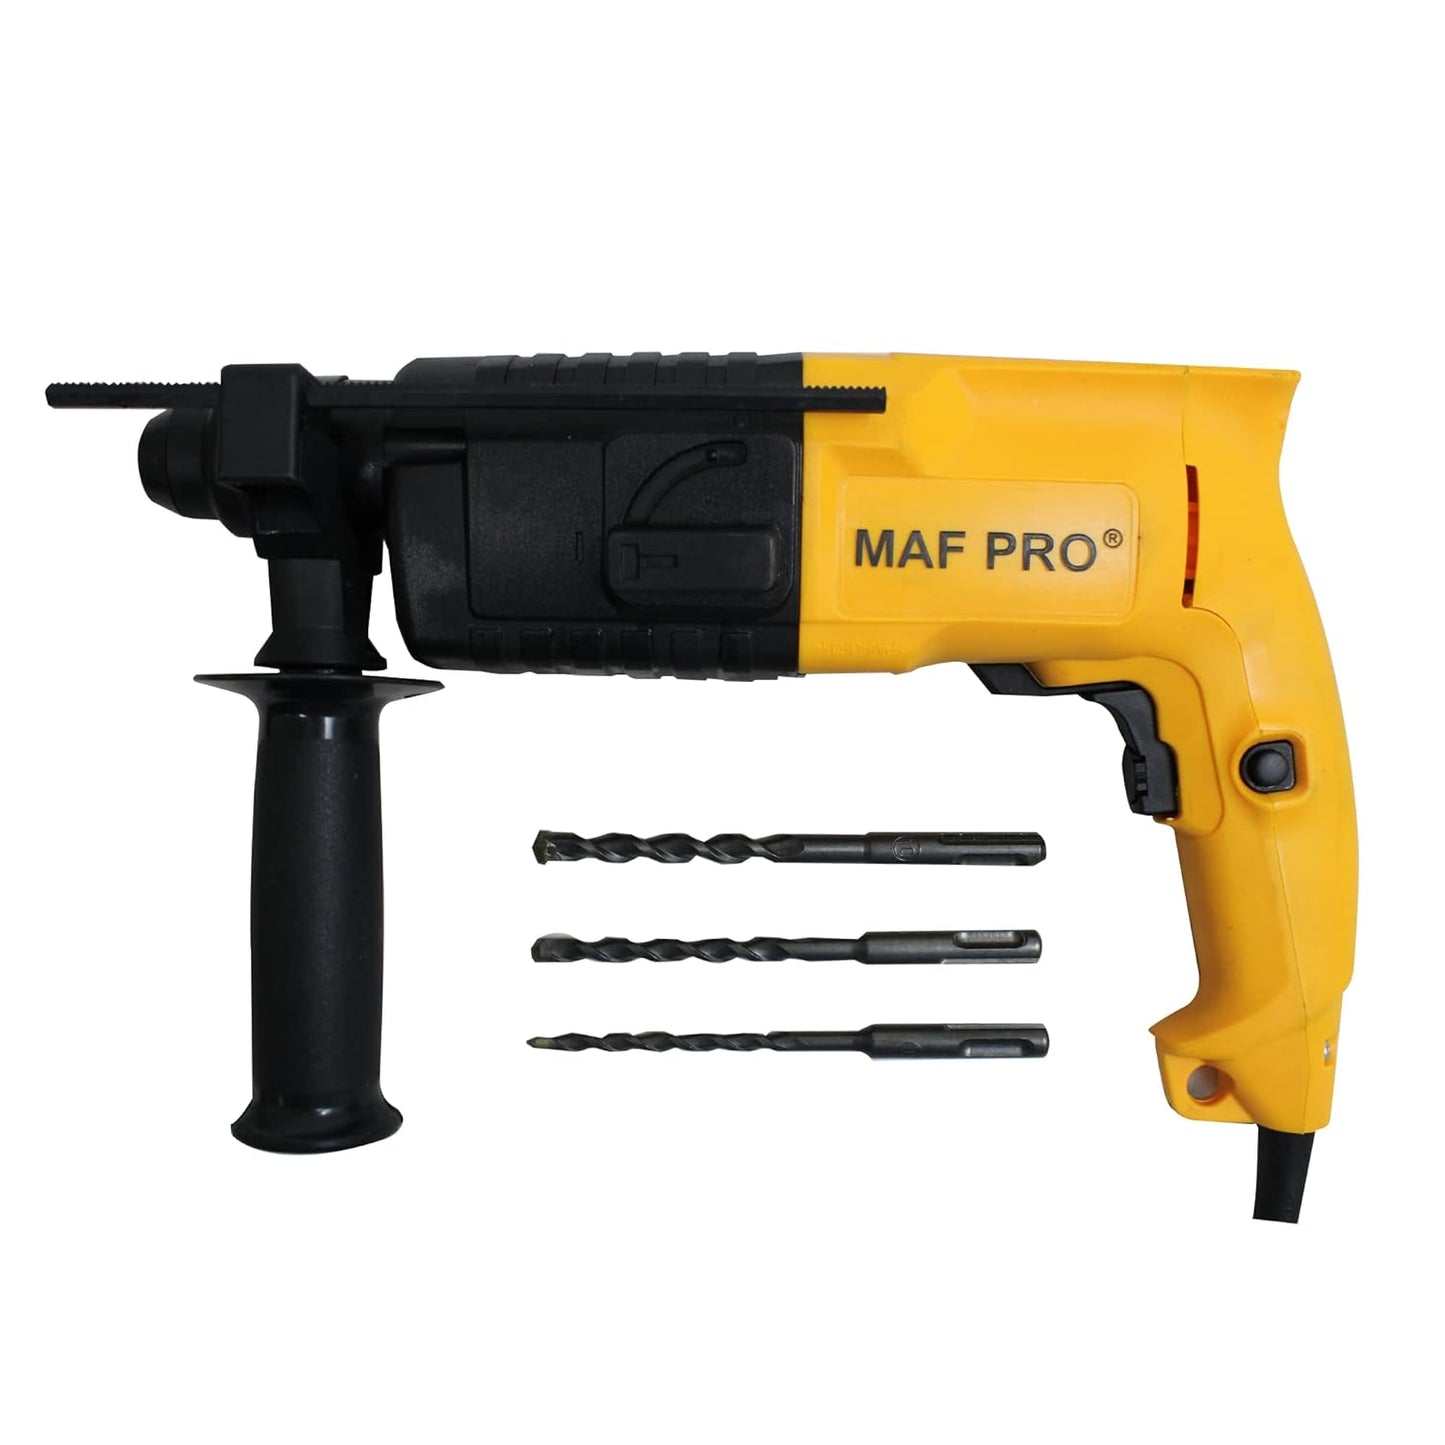 MAF PRO MRH5005 650 W, 22 mm, 850 Rpm, Heavy Duty SDS Plus Type Shank Variable Speed Reversible 2 Functions Rotary Hammer Drill with 3 Bits For Hammering & Drilling on Concrete, Masonry & Wood